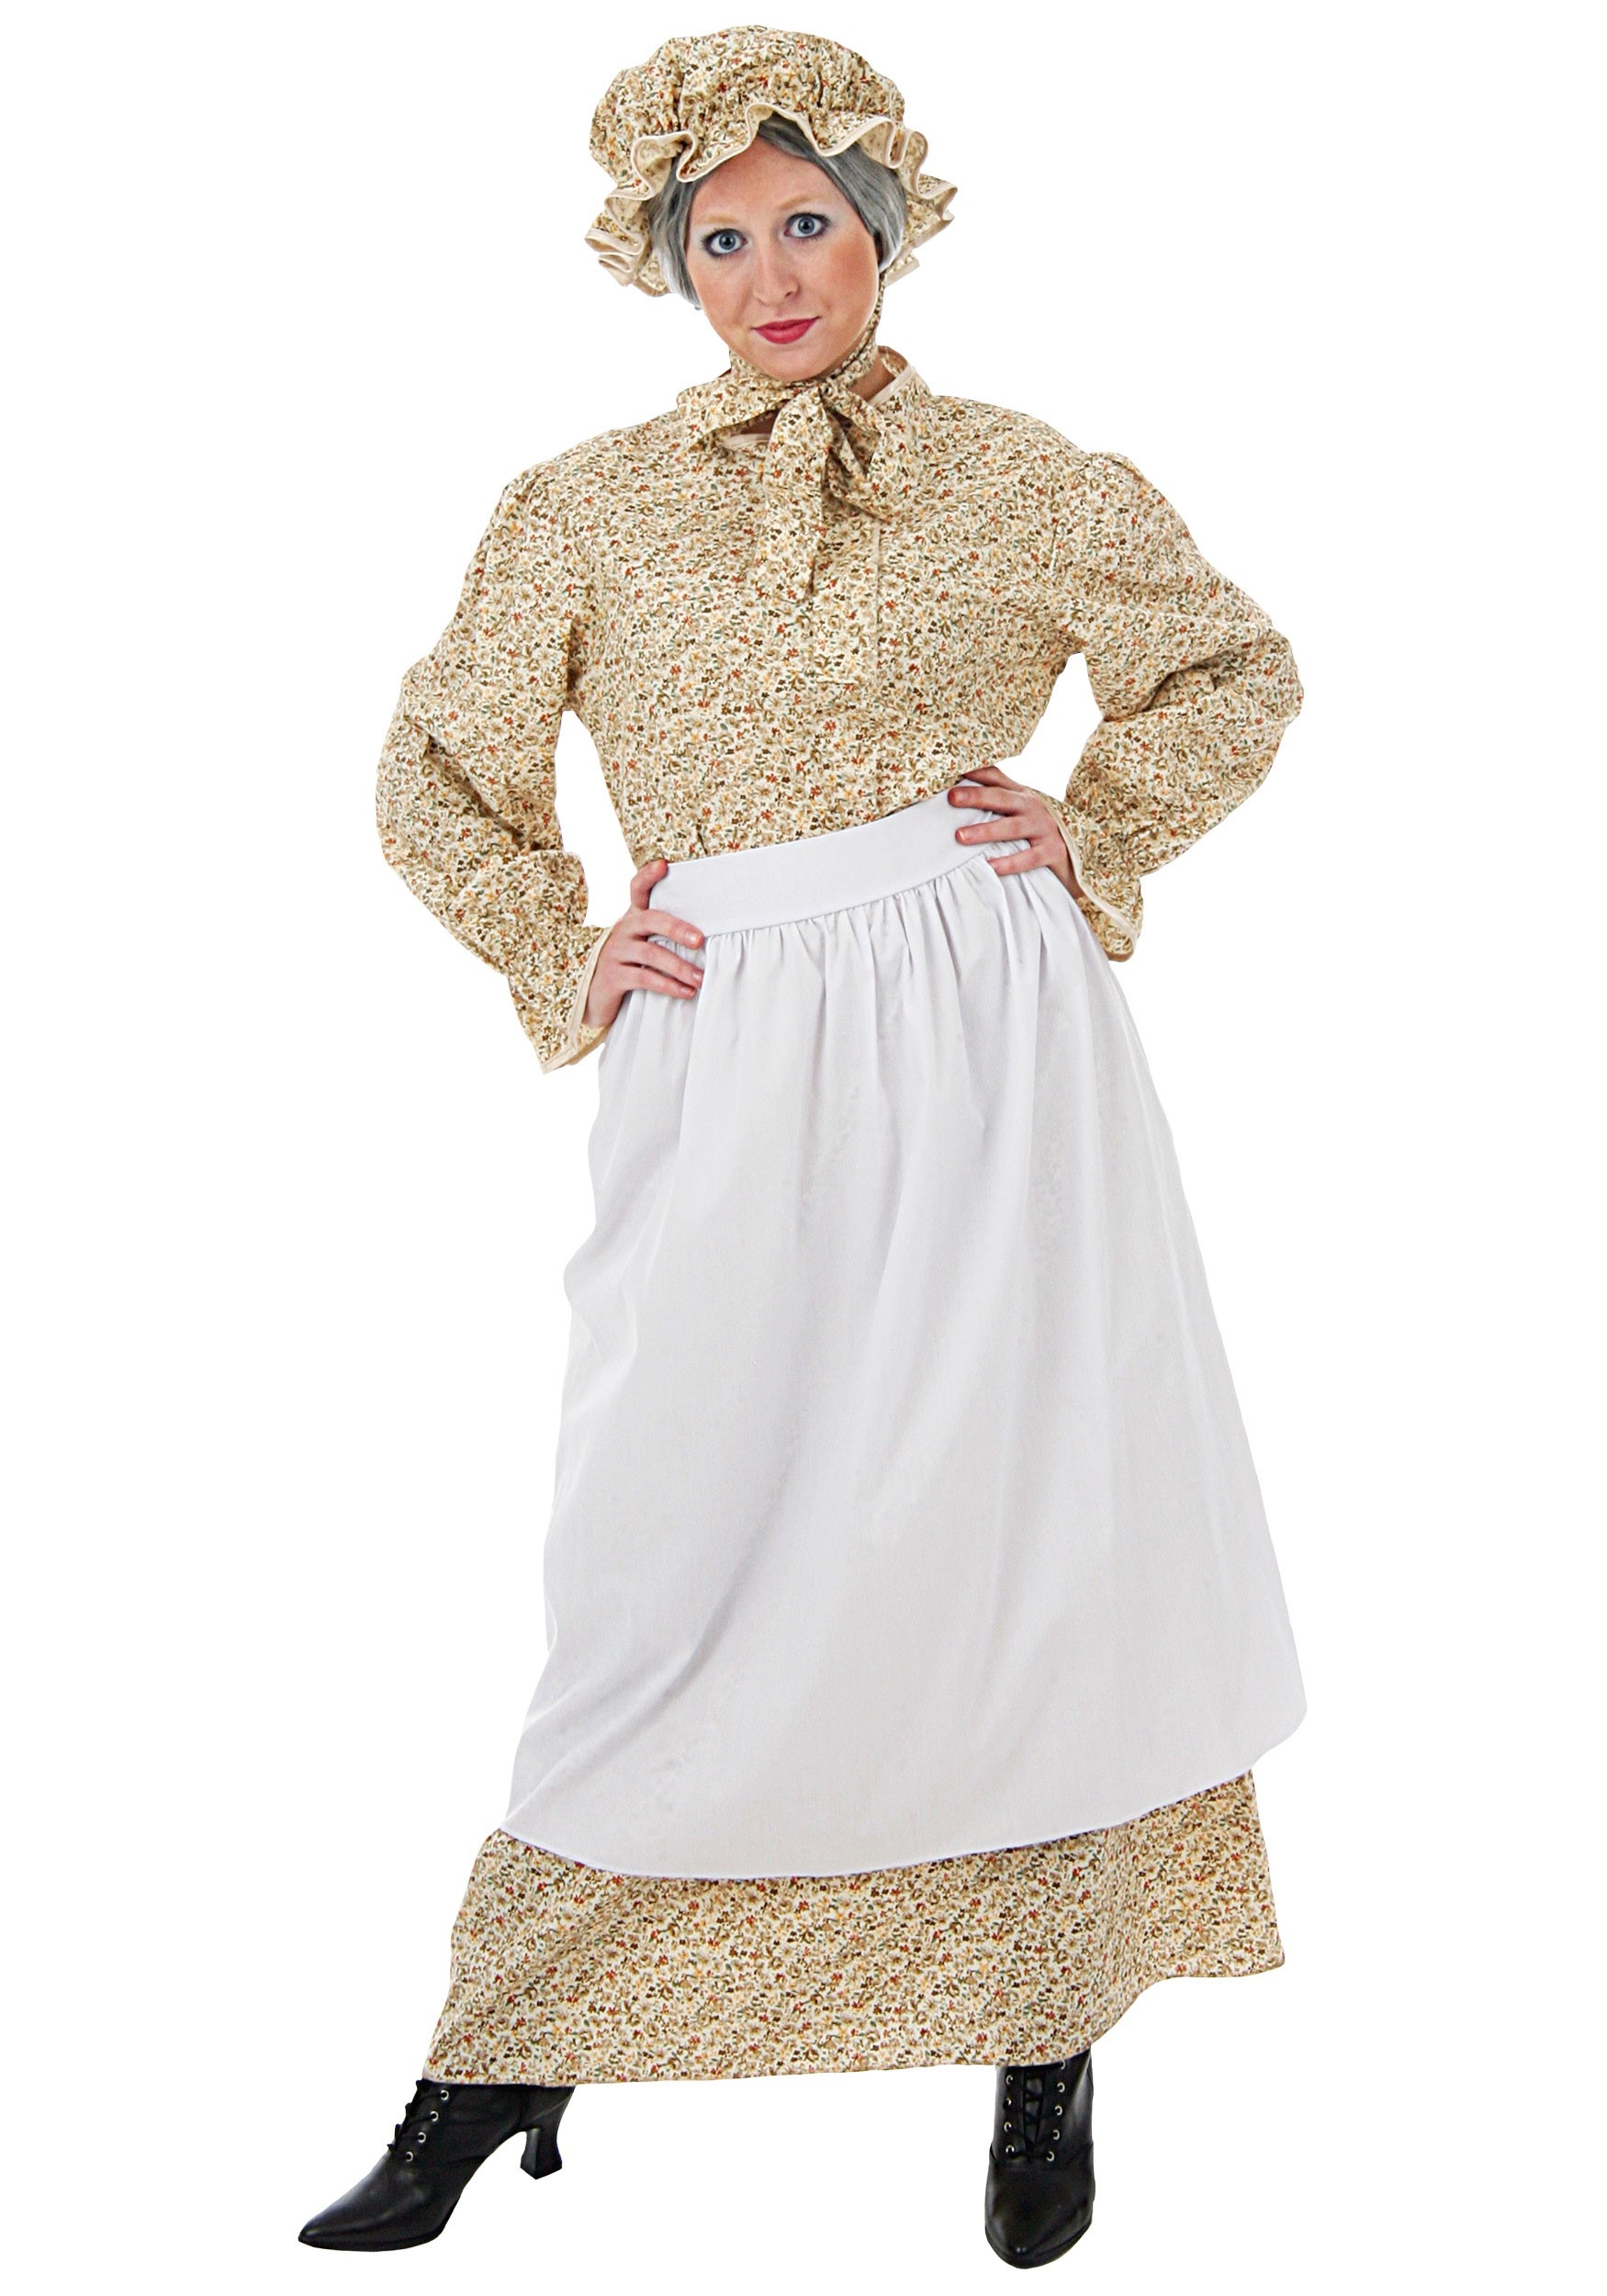 Photos - Fancy Dress Wizard FUN Costumes Auntie Adult Costume |  of Oz Costumes for Adults Beige 